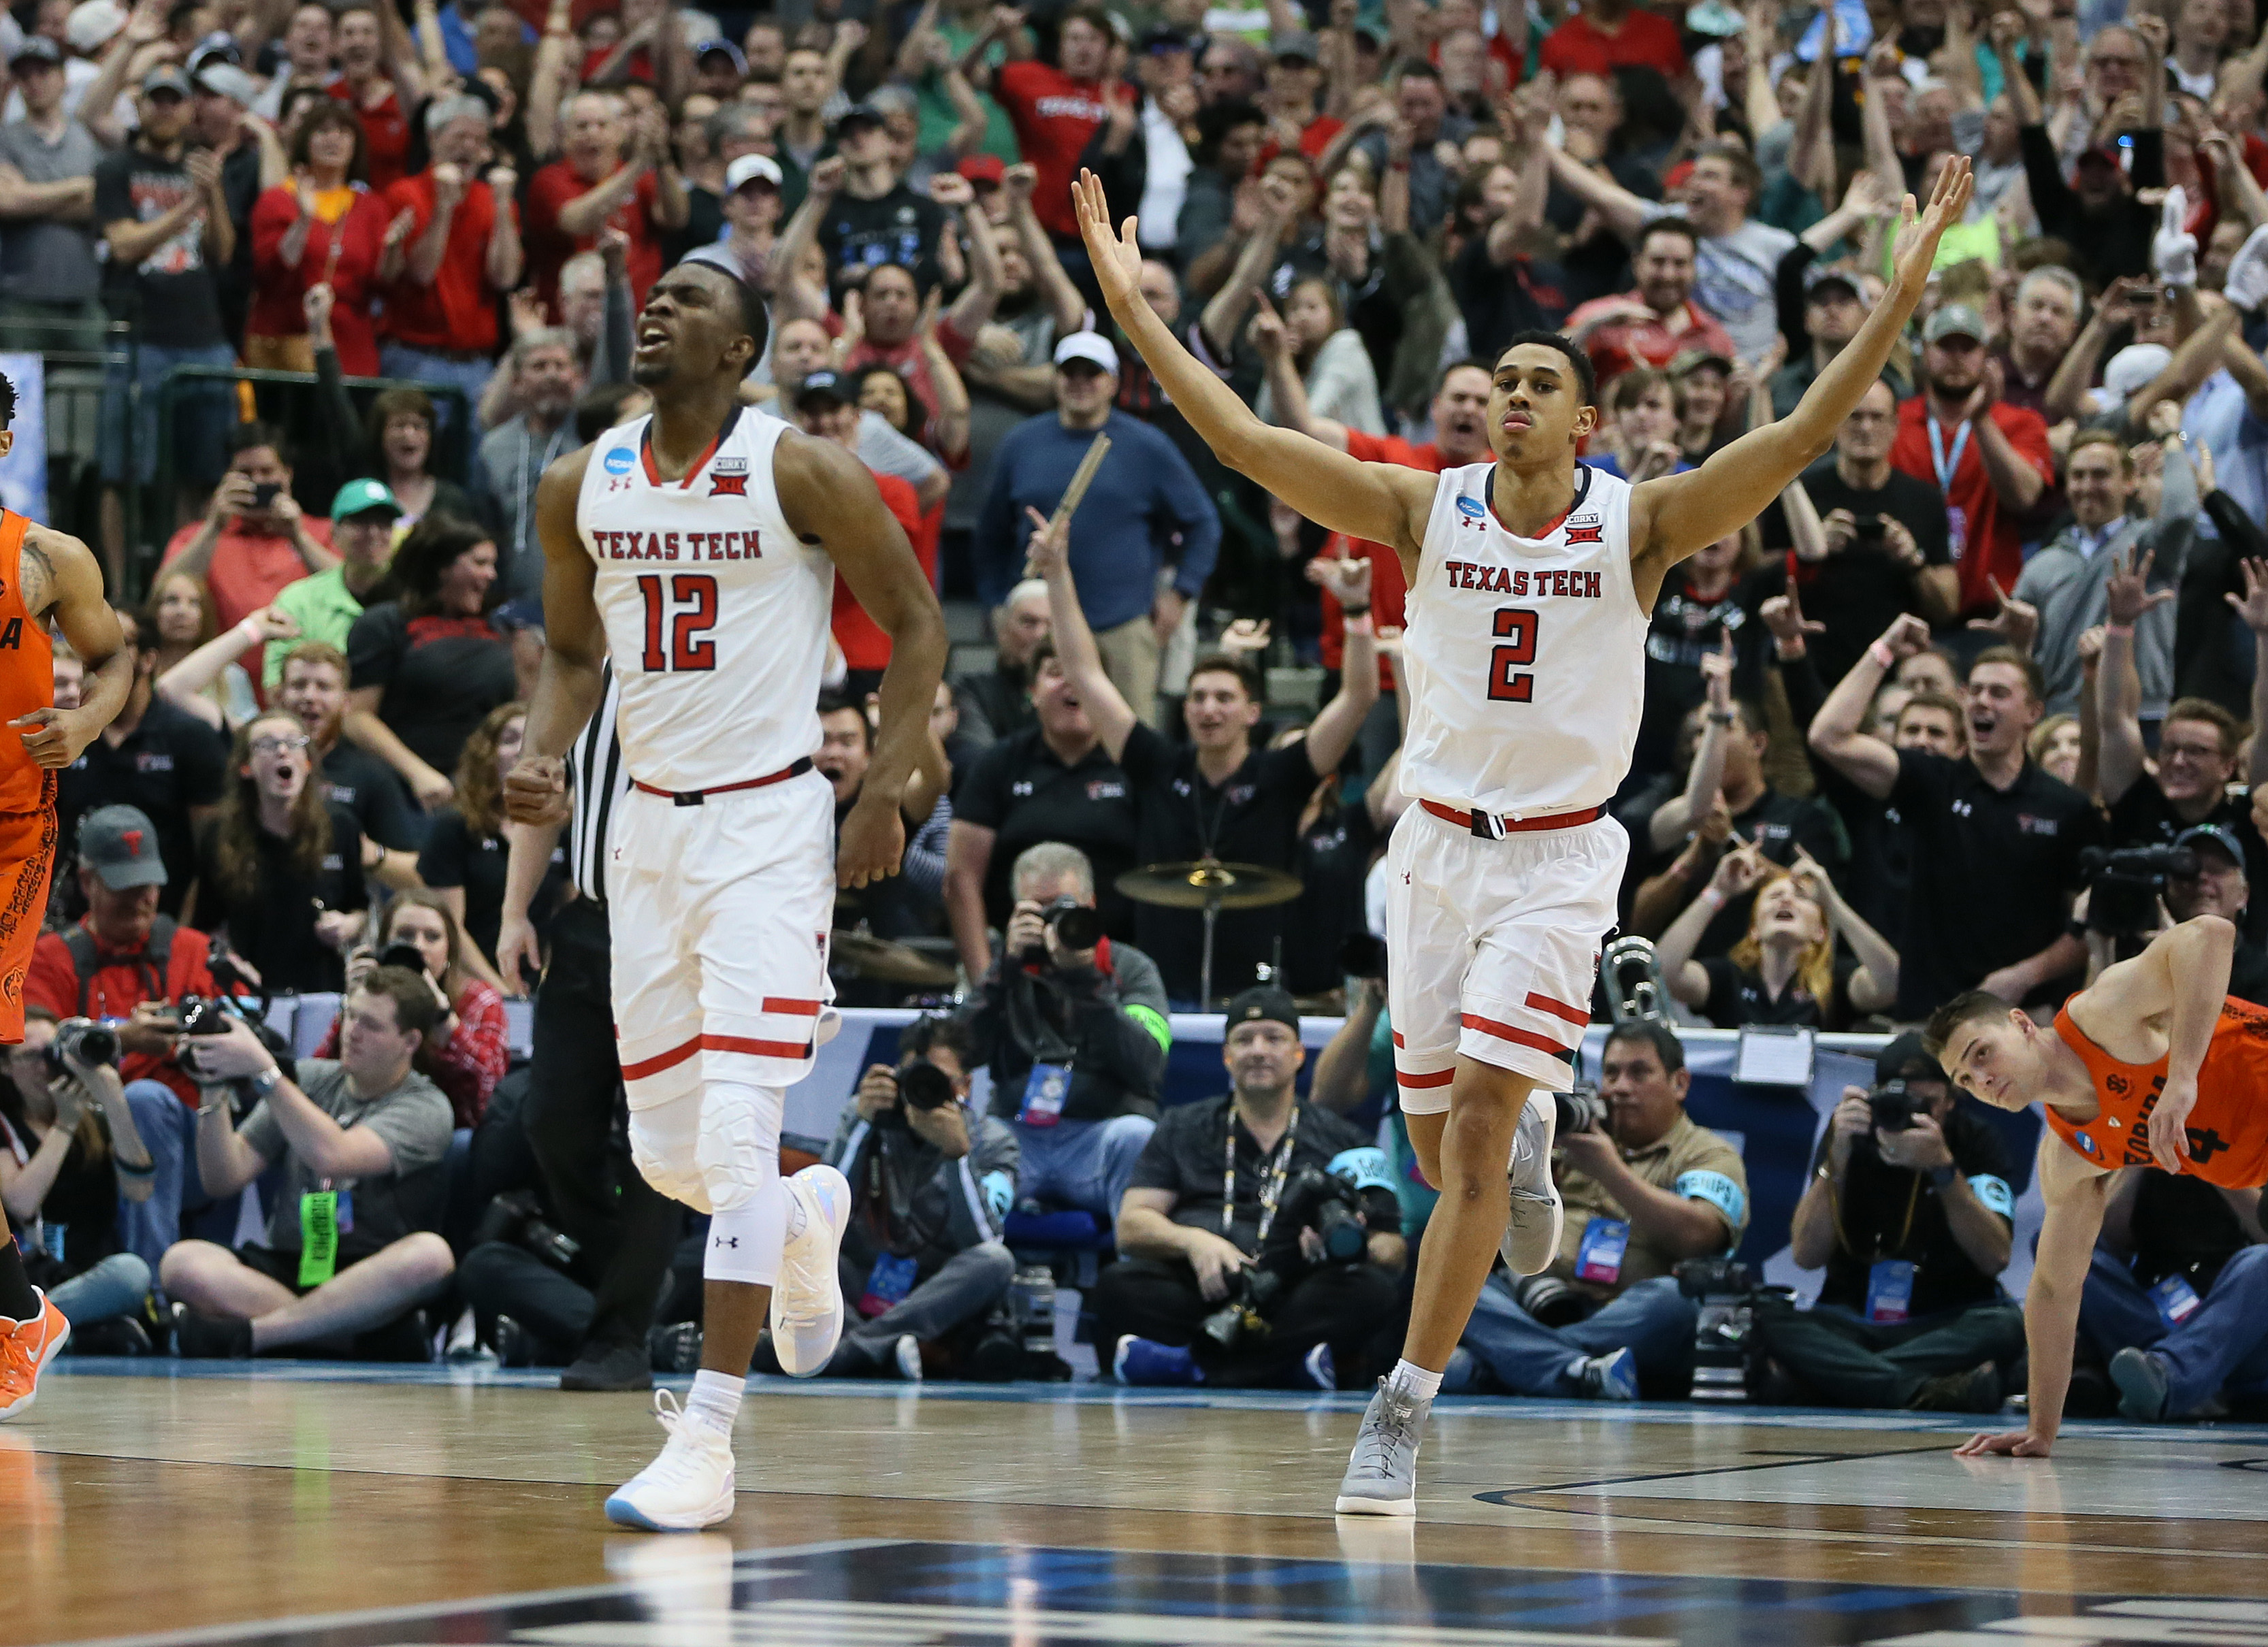 PHOTOS: Texas Tech shipping up to Boston for the Sweet 16 after win over Florida